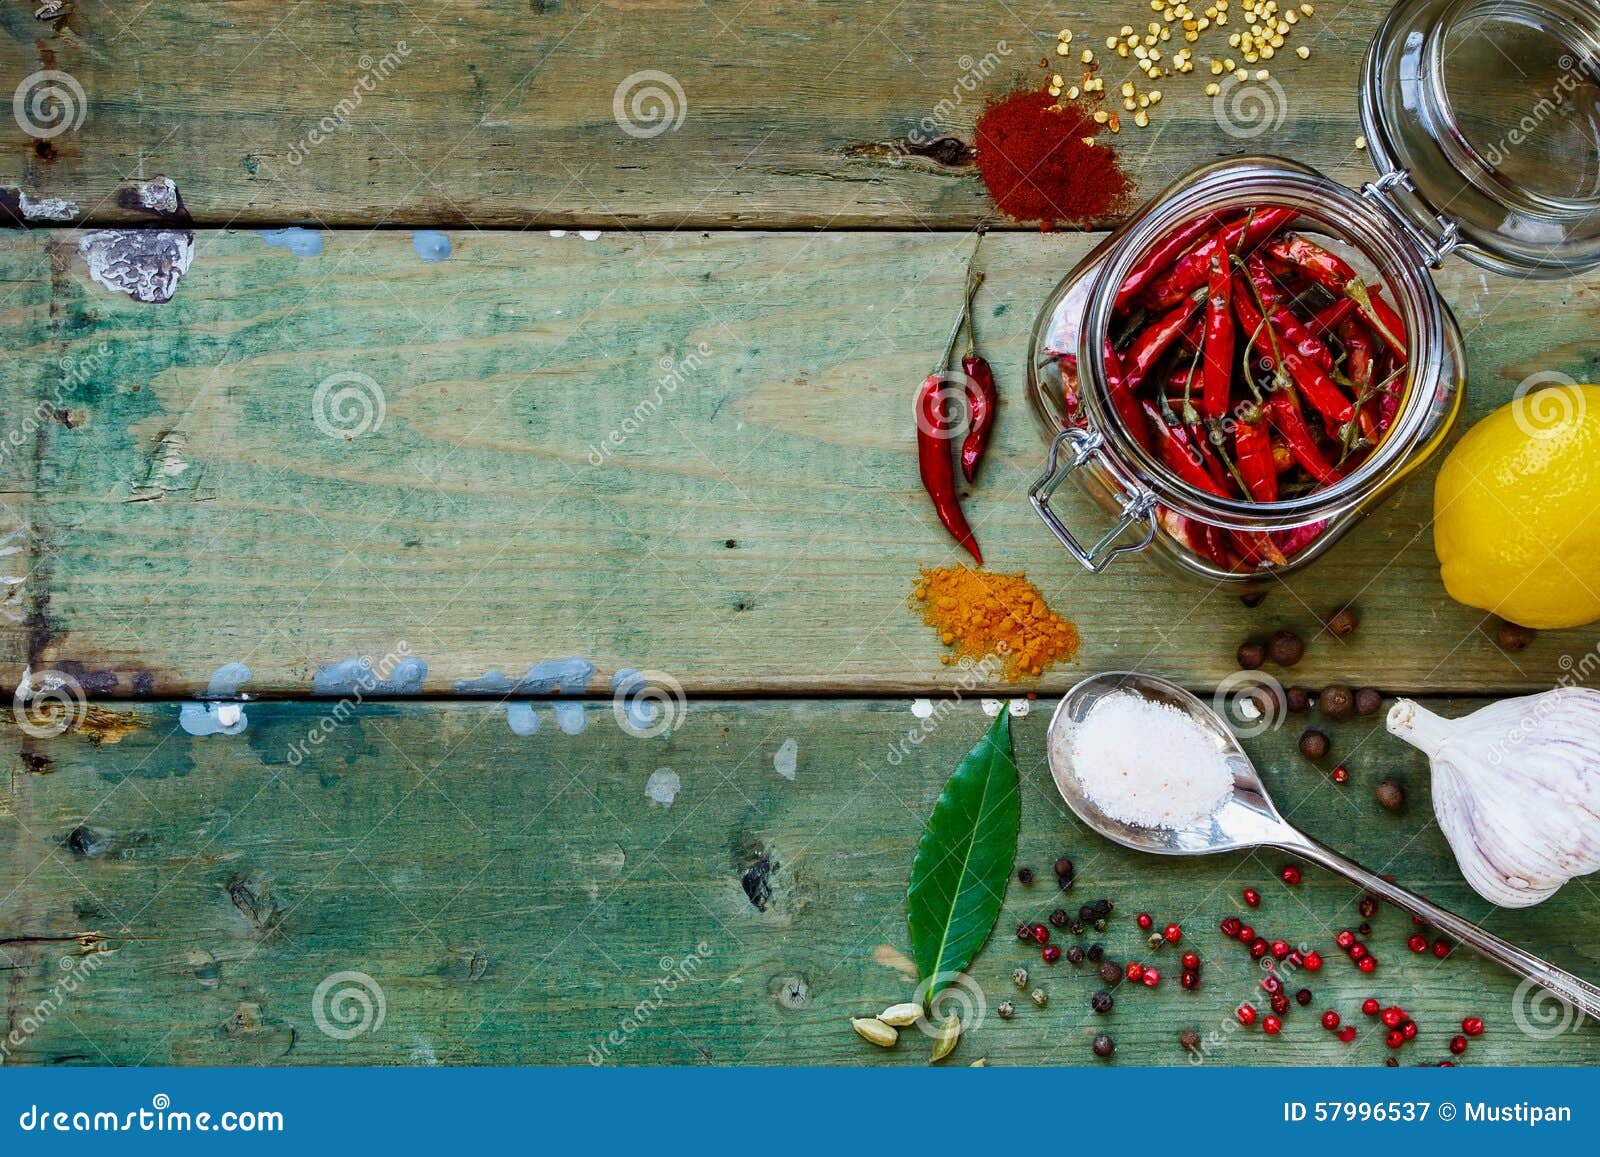 Red Hot Chili Peppers With Herbs And Spices Over Wooden Background   Cooking Or Spicy Food Concept Stock Photo Picture and Royalty Free Image  Image 29655648